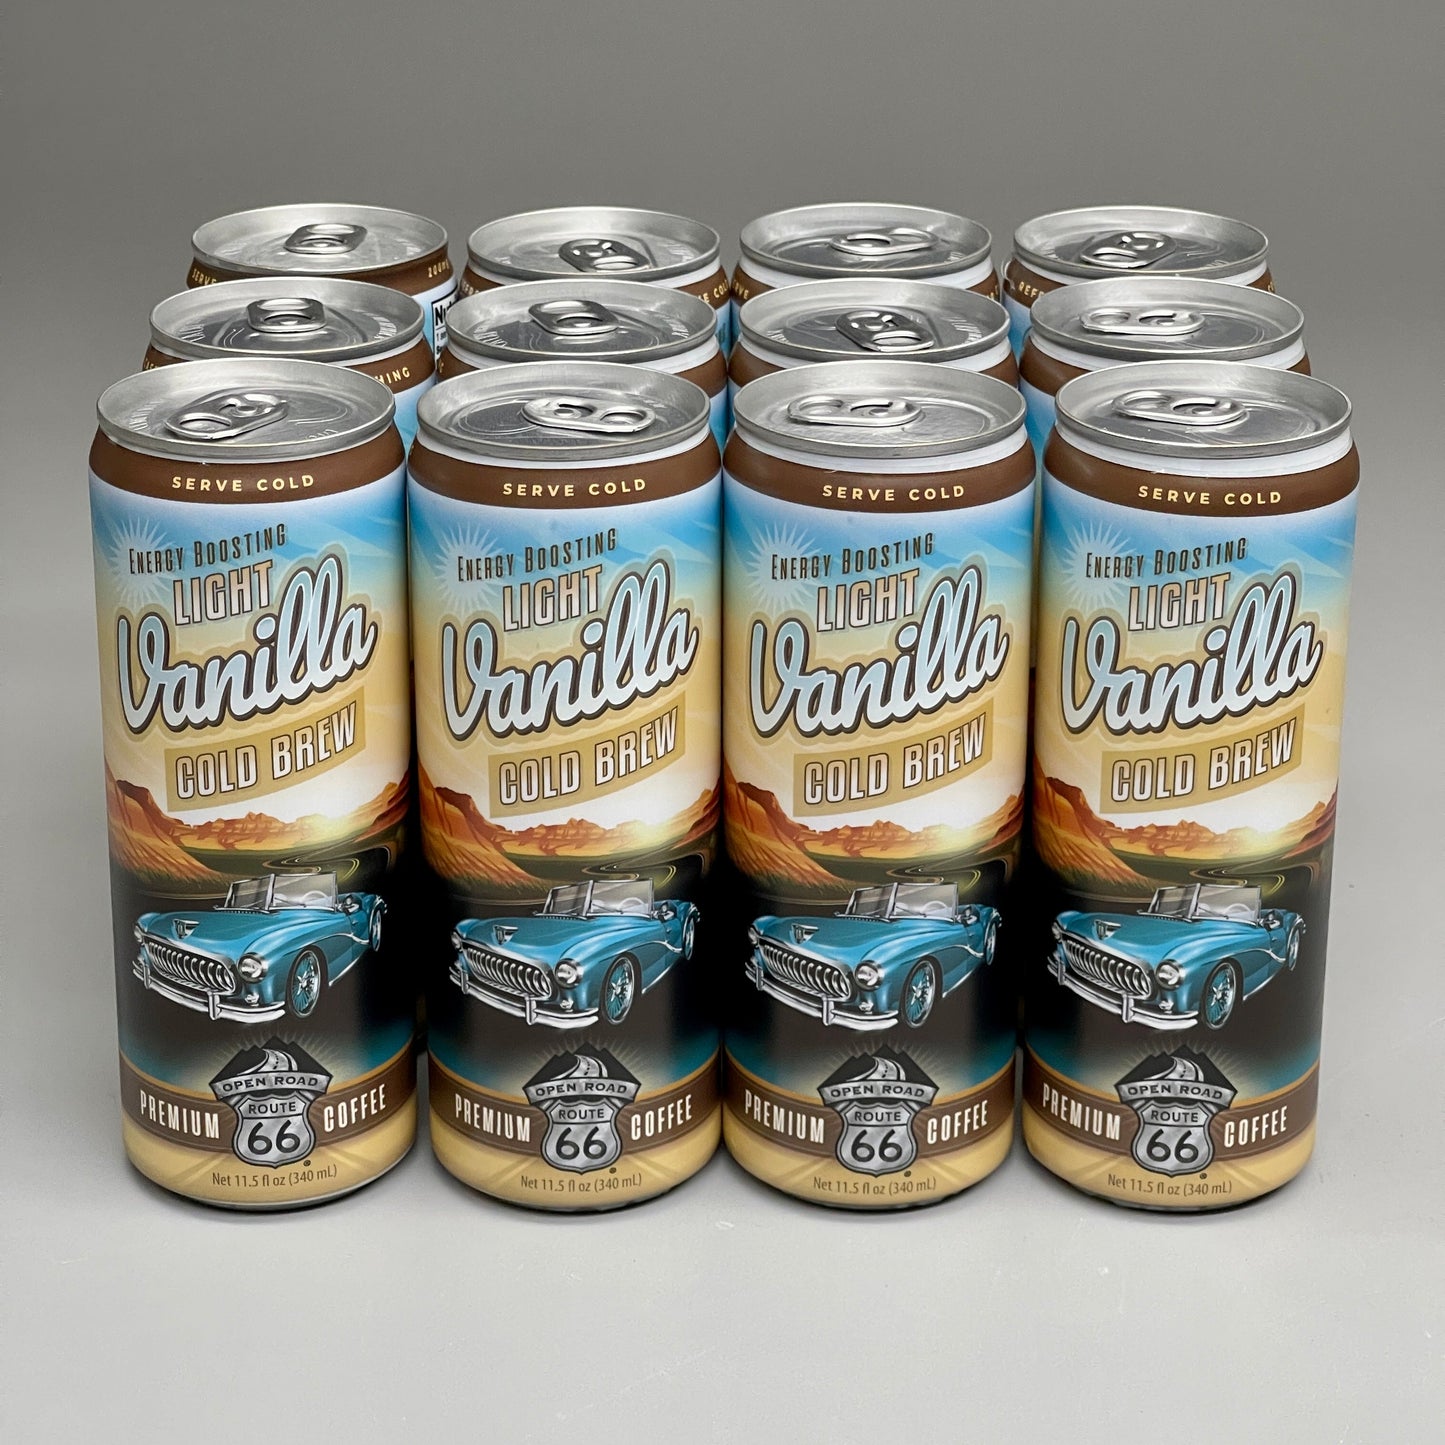 ZA@ 12 CANS! OPEN ROAD ROUTE 66 Energy Boosting Light Vanilla Cold Brew Drink 11.5 fl oz (06/24) Premium Coffee D